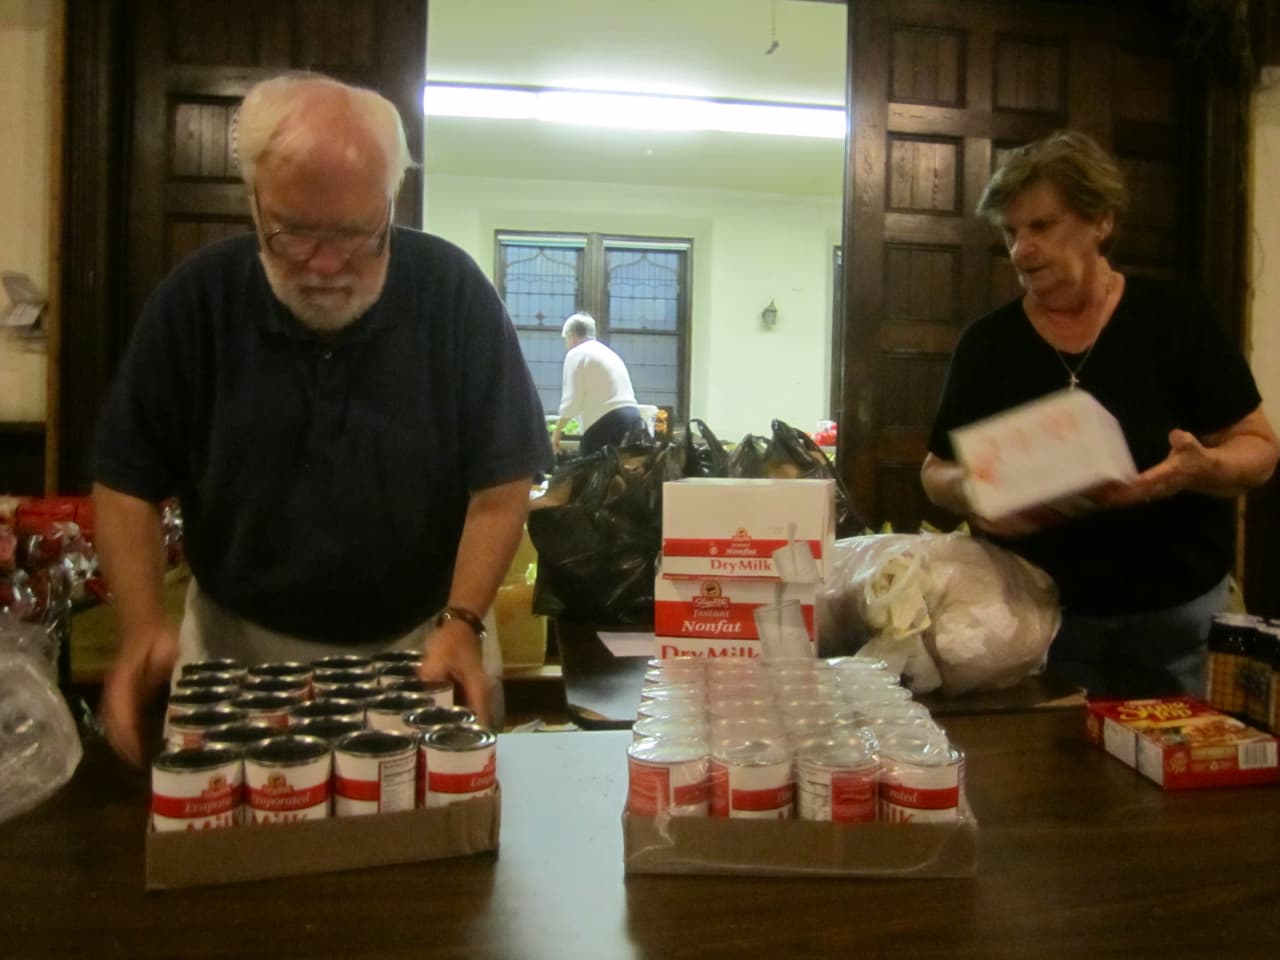 Volunteers Richard Devir Margaret Young prepare food items in September for the Ossining Food Pantry. The pantry is one of several in Ossining and Briarcliff Manor receiving goods through fundraisers this holiday season.